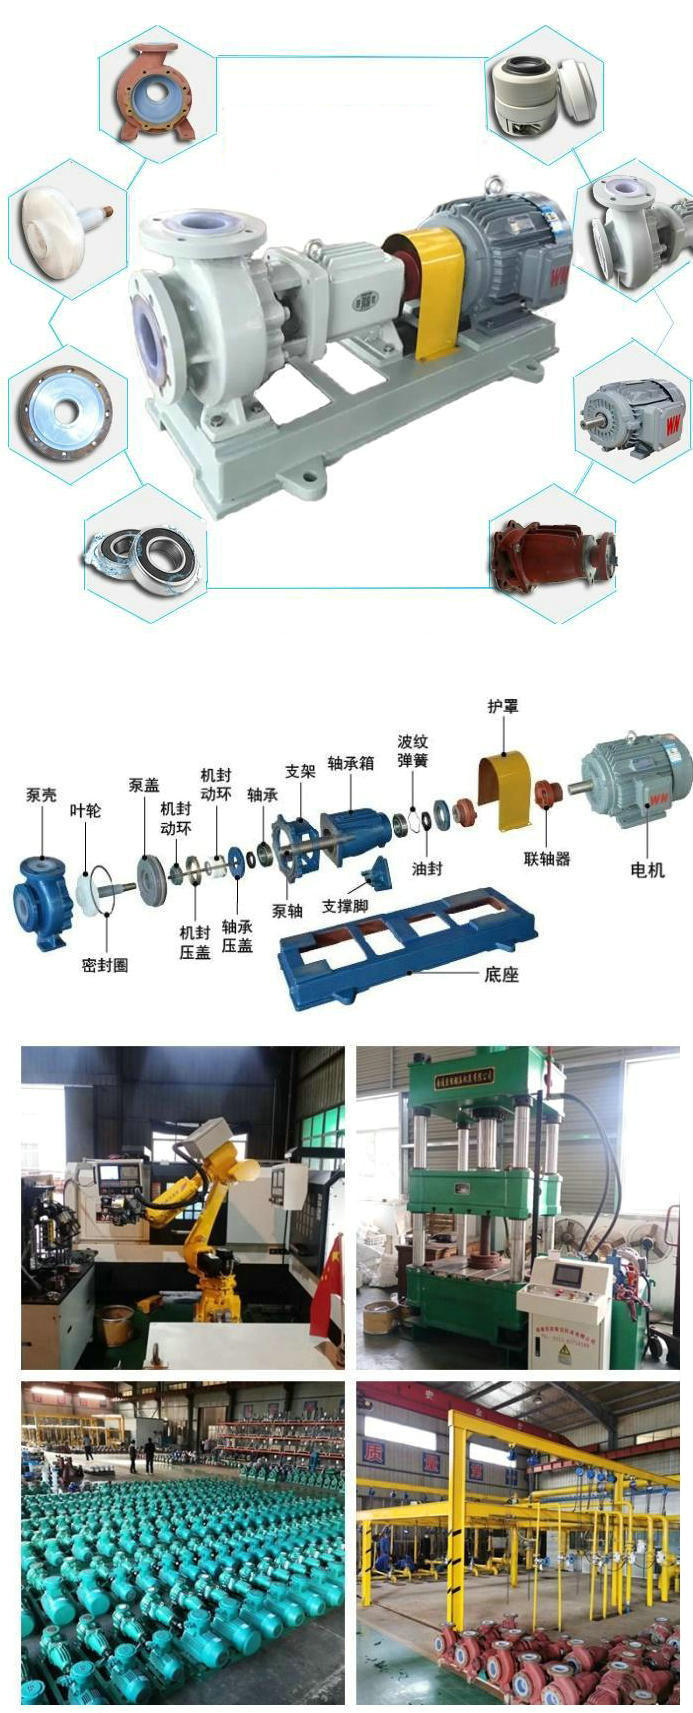 Ihf Fluorine Plastic Lined Magnetic Drive Corrosion Chemical Centrifugal Pump for Highly Corrosive Chemicals HCl Hydrochloric Acid Pump Ihf80-50-250